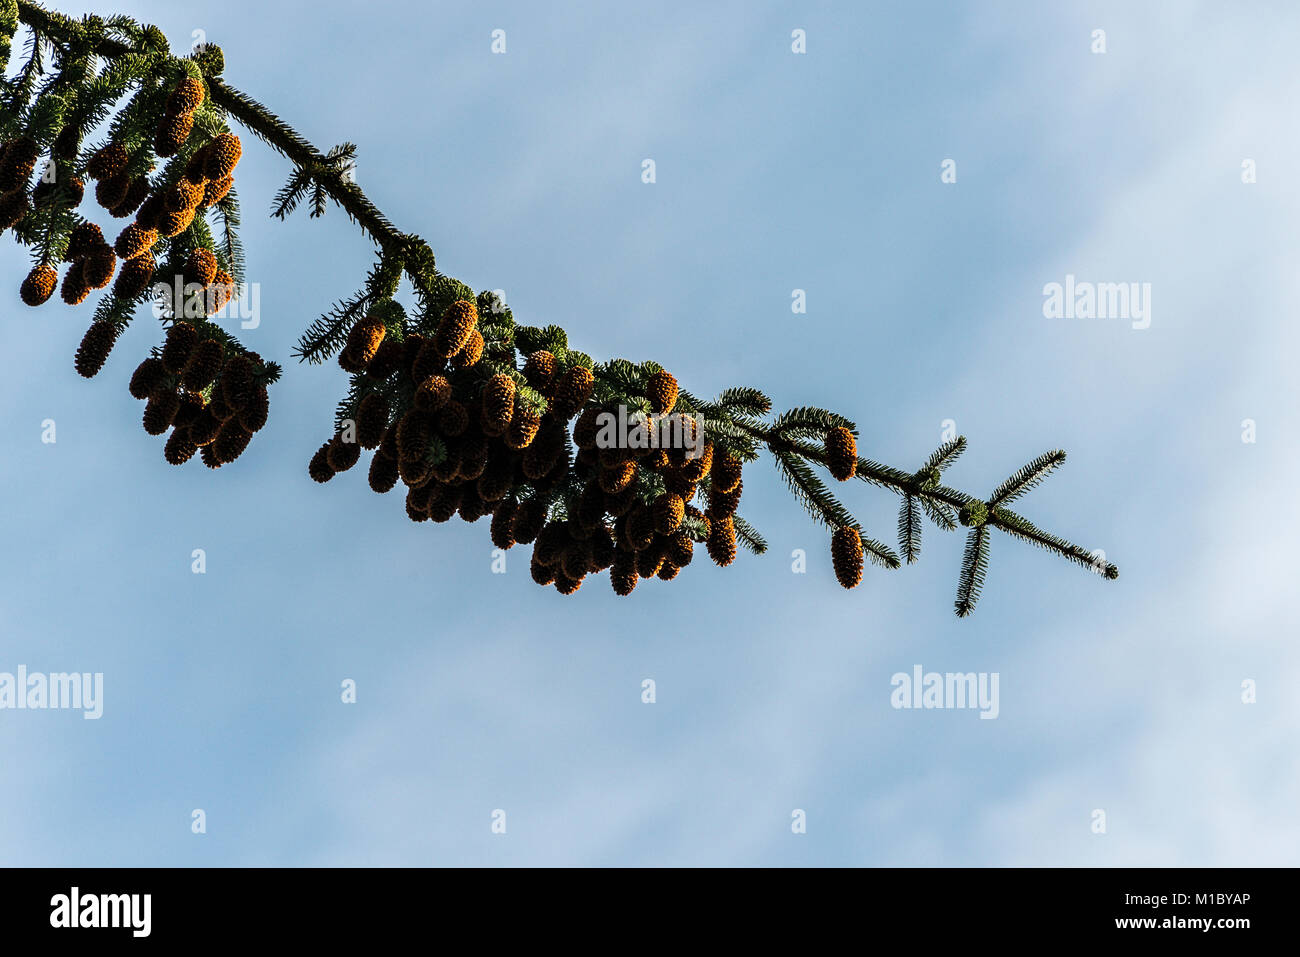 A branch of a sitka spruce (Picea sitchensis) tree heavily laden with cones against a blue sky with wispy clouds Stock Photo